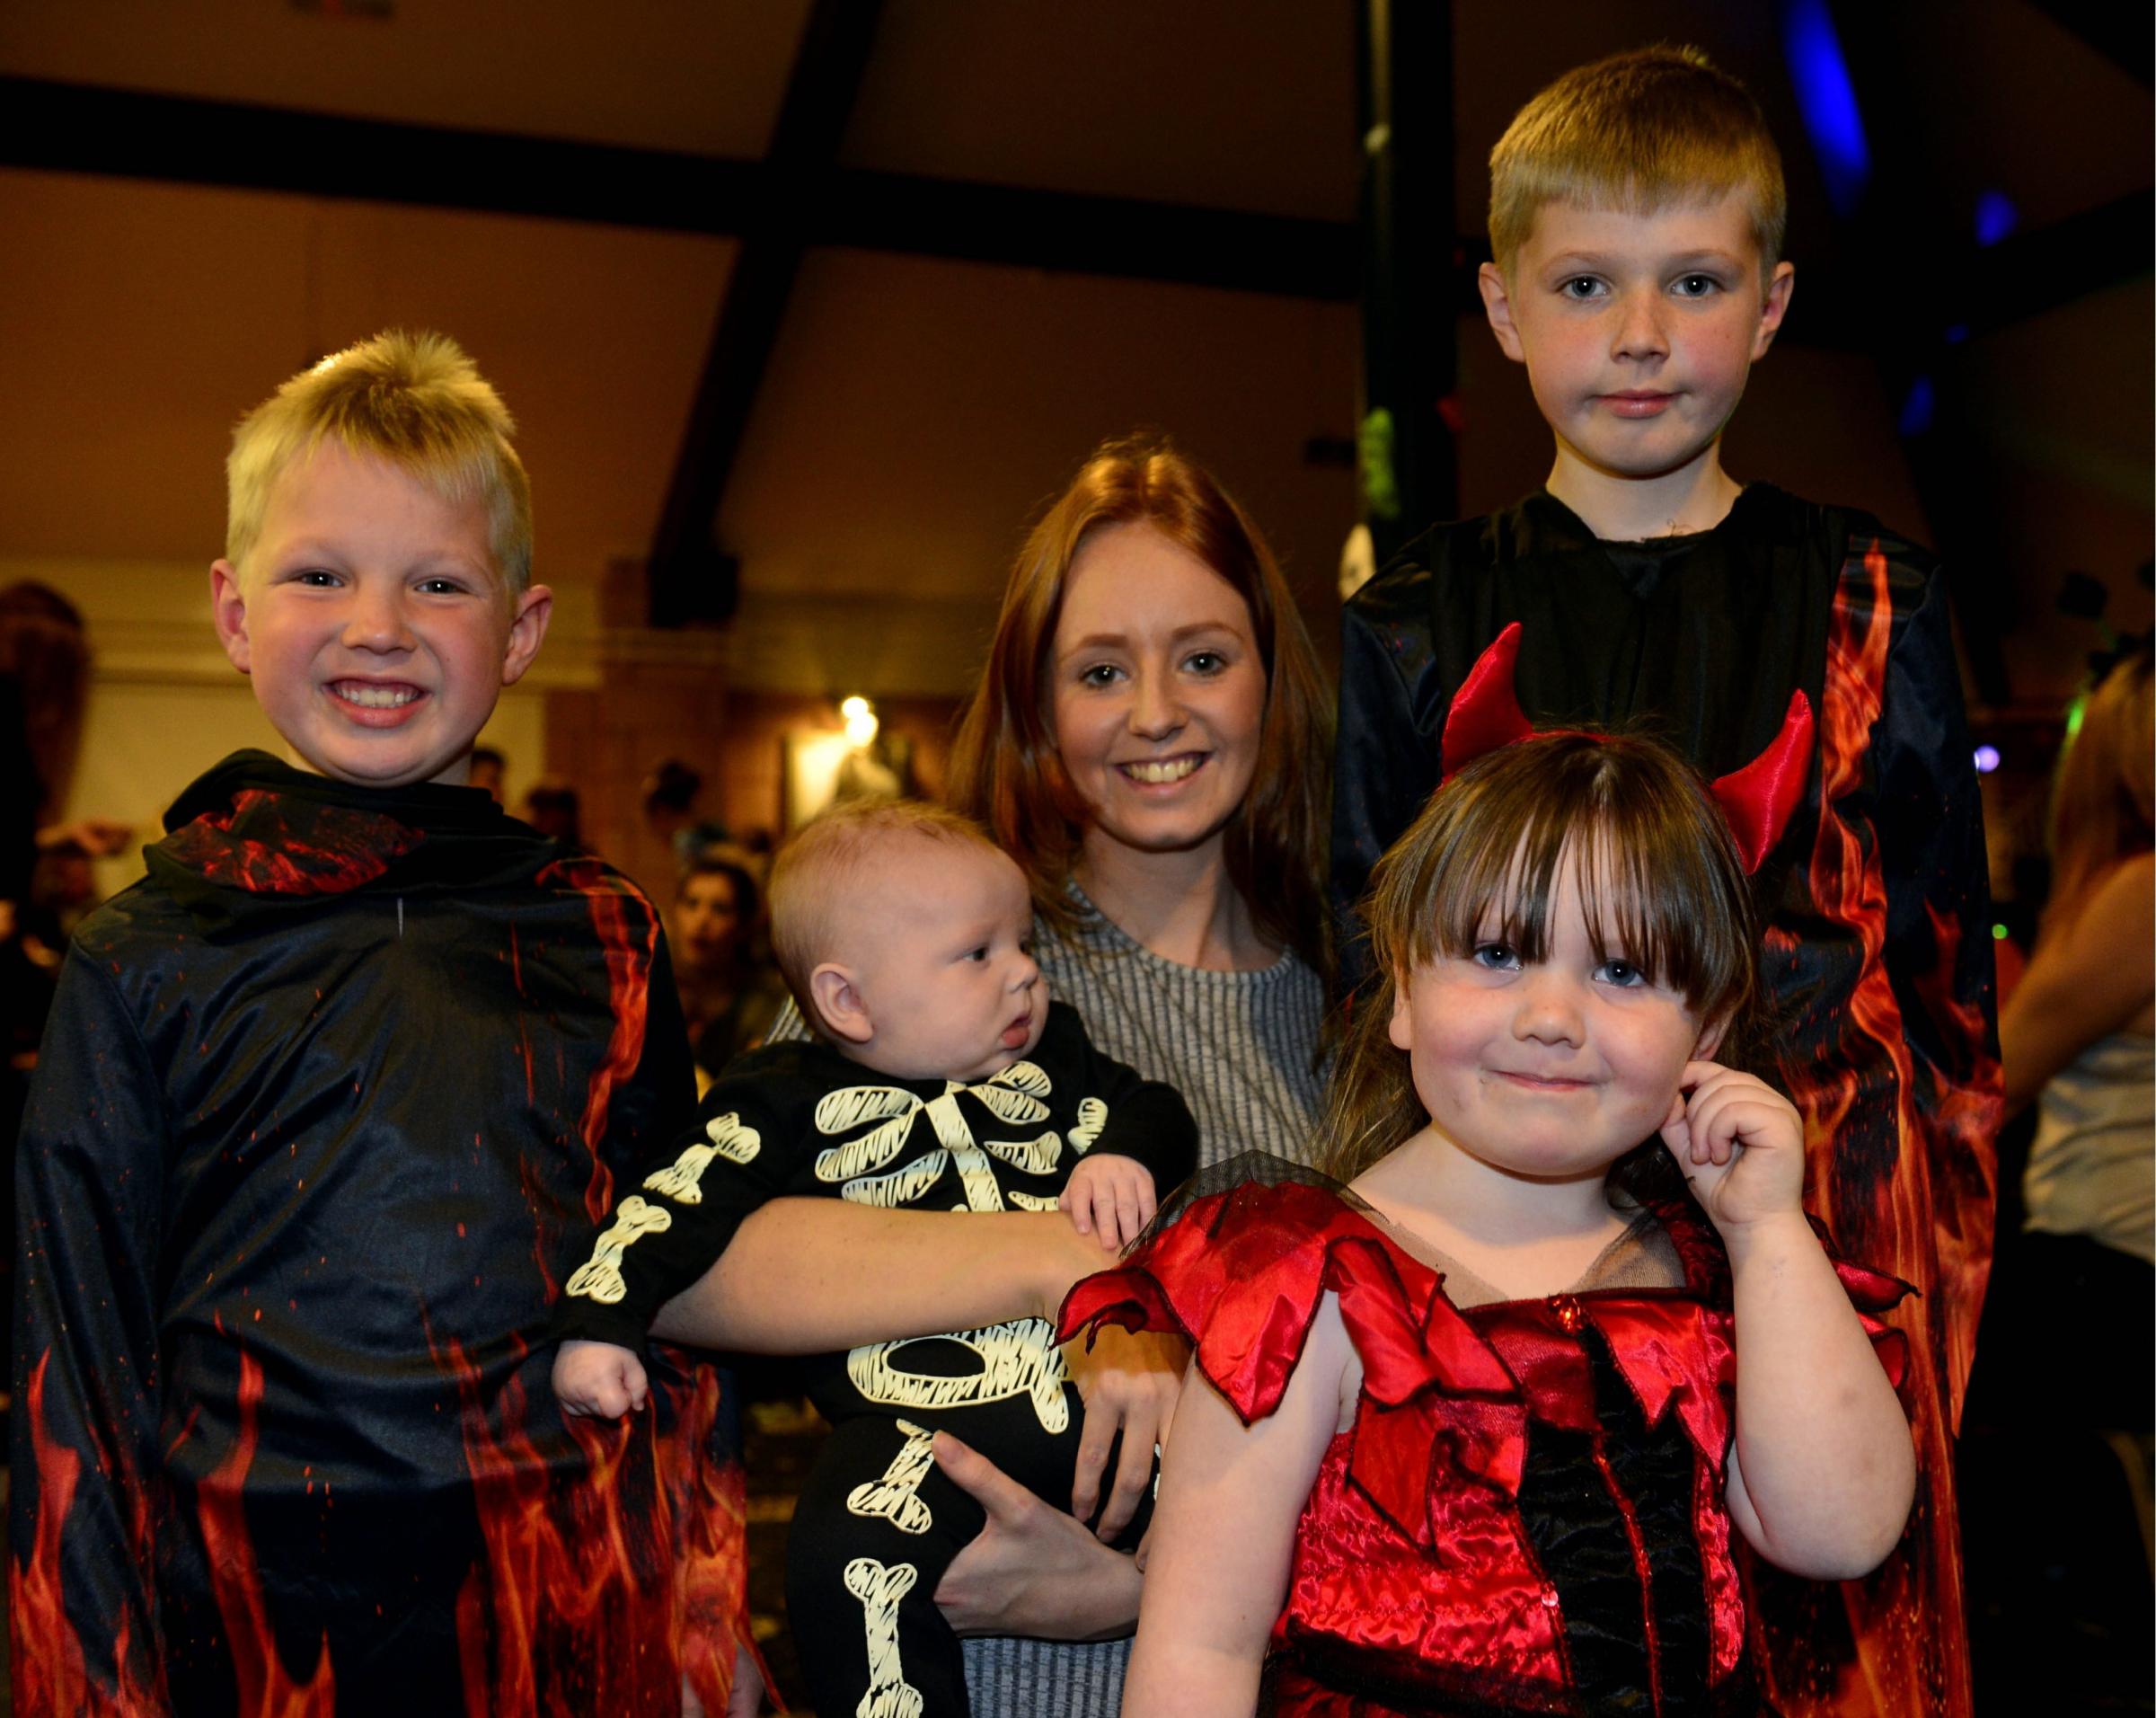 Halloween party at Creighton Rugby Club, Carlisle to raise money for the Eden Valley Hospice. All dressed up (left to right) Joshua Bowe, Thomas Smith, Toni Bowe, Rosie Smith and Joseph Bowe all from Eastriggs: 27 October 2016 STUART WALKER 